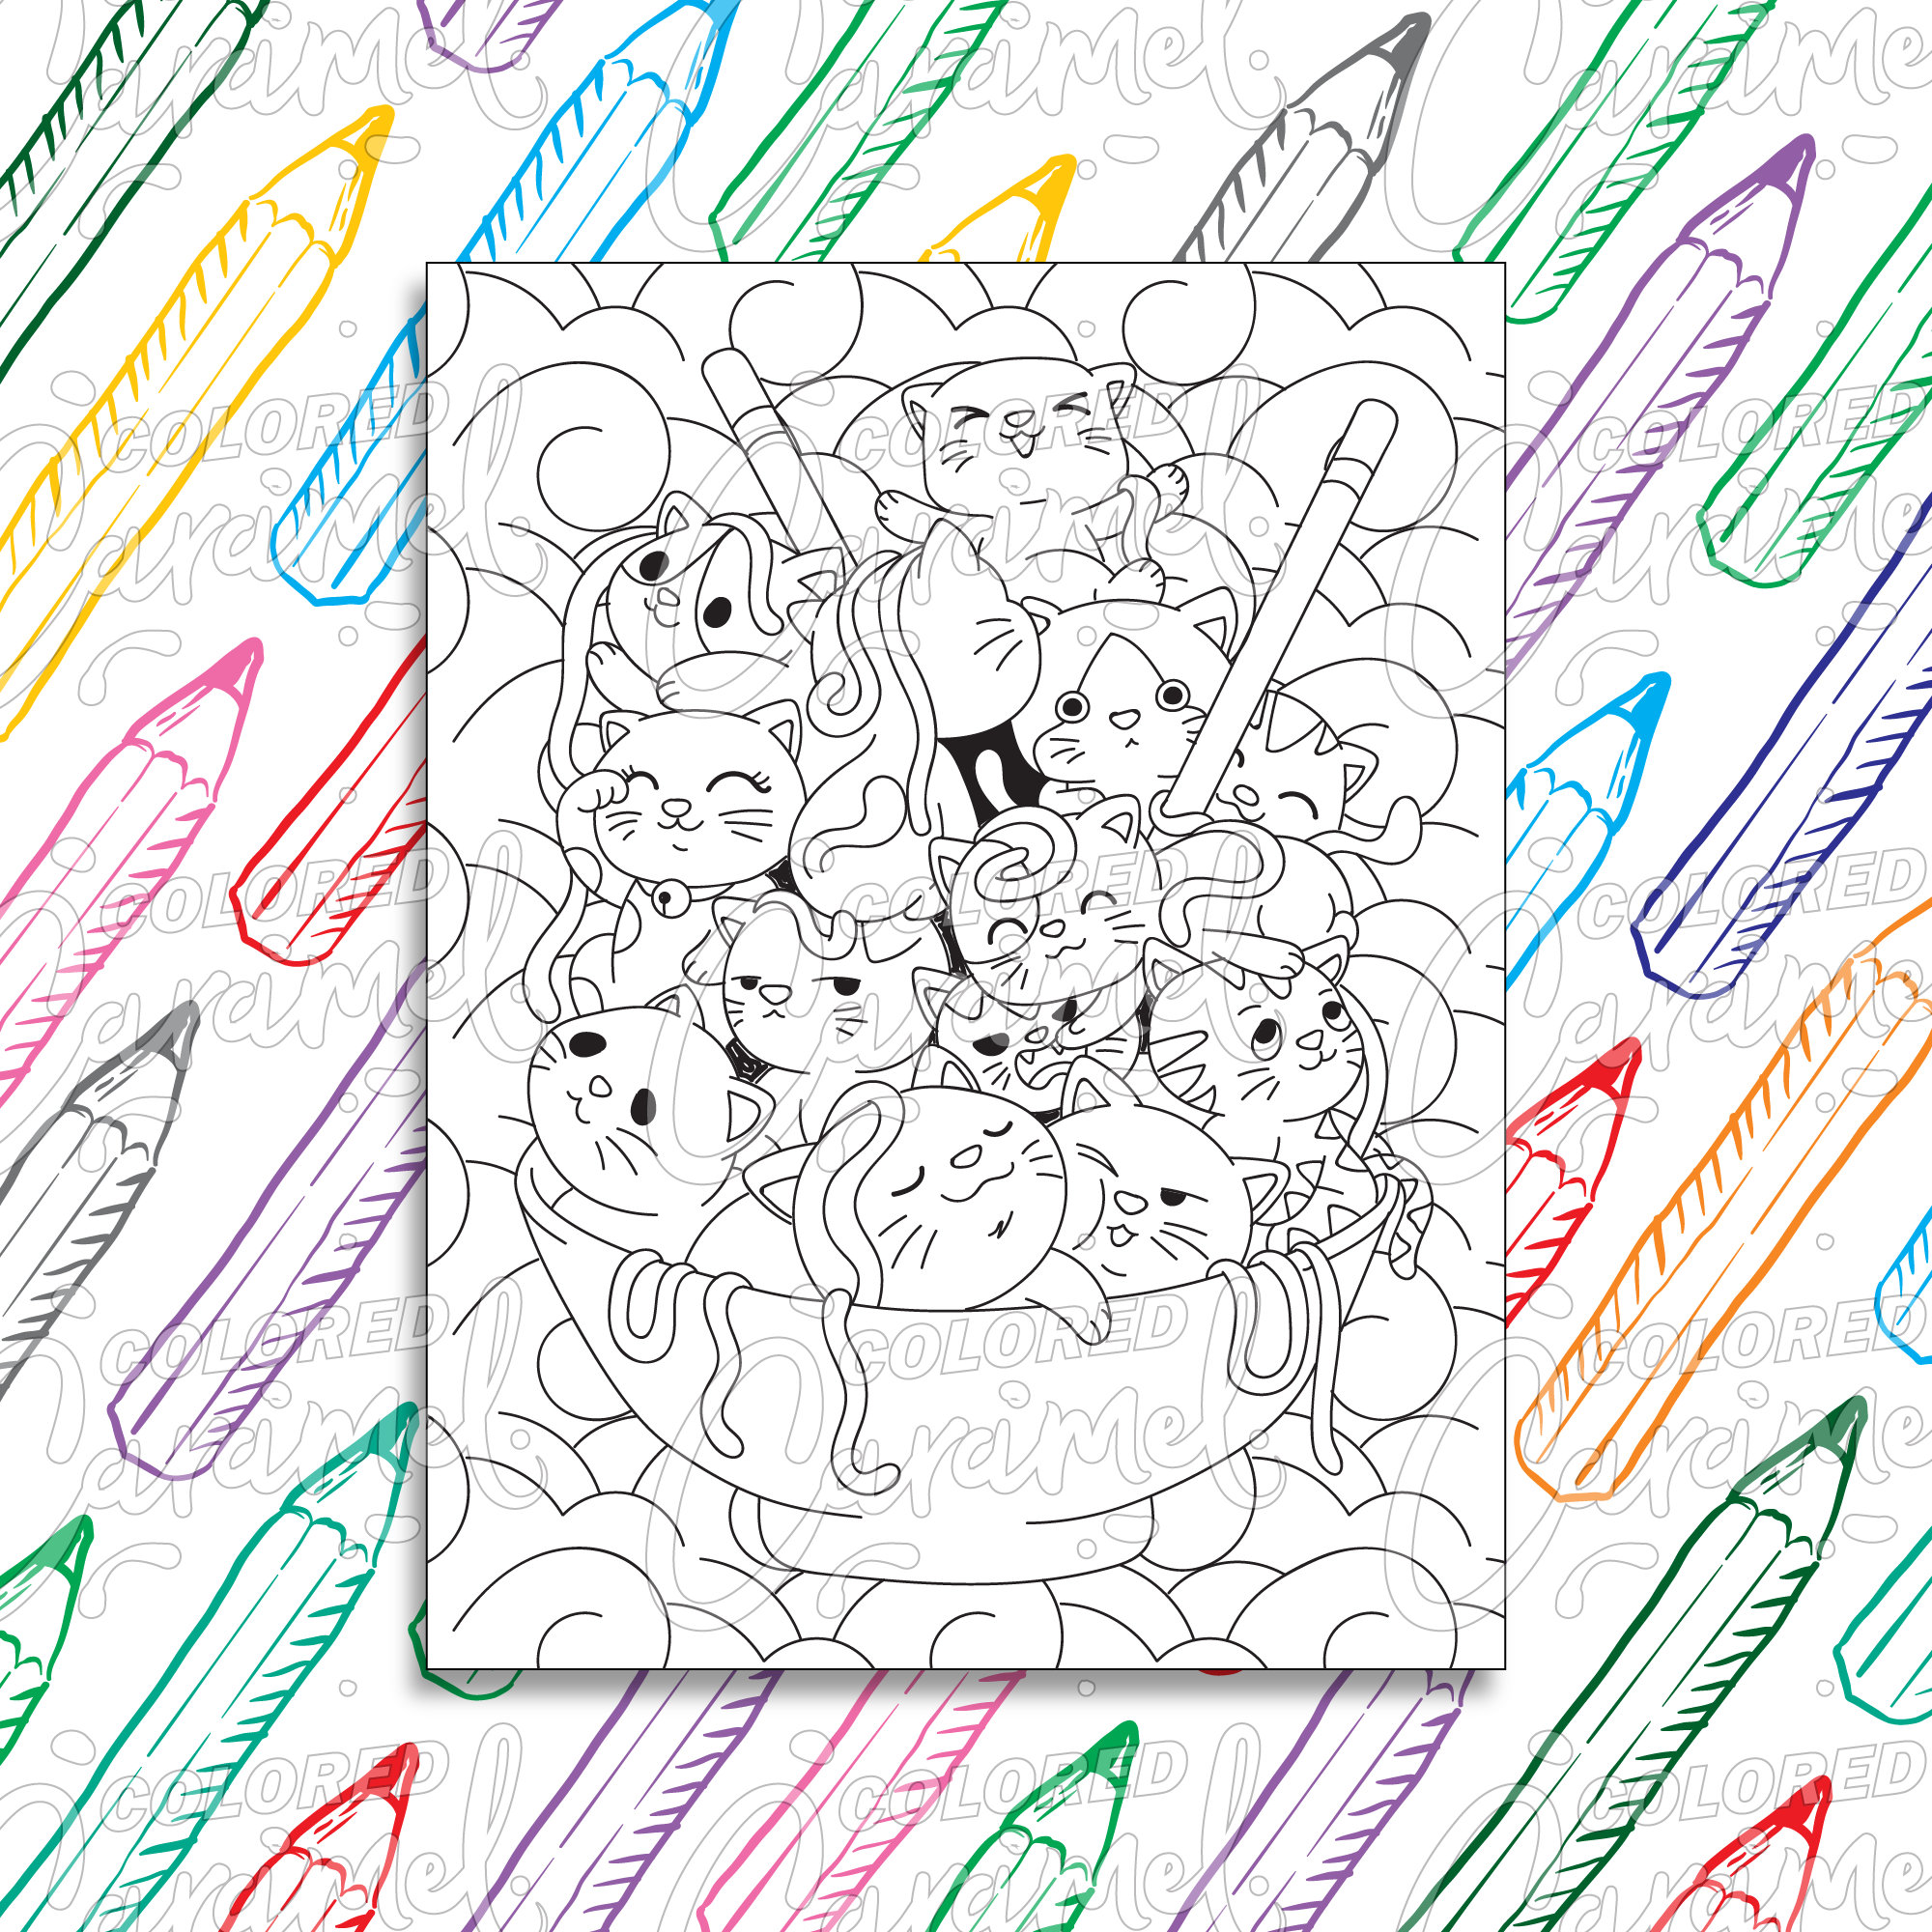 Kawaii Coloring Page Digital Download PDF with Cute Cats in Ramen Noodle Bowl Beautiful Japanese Inspired Drawing & Illustration